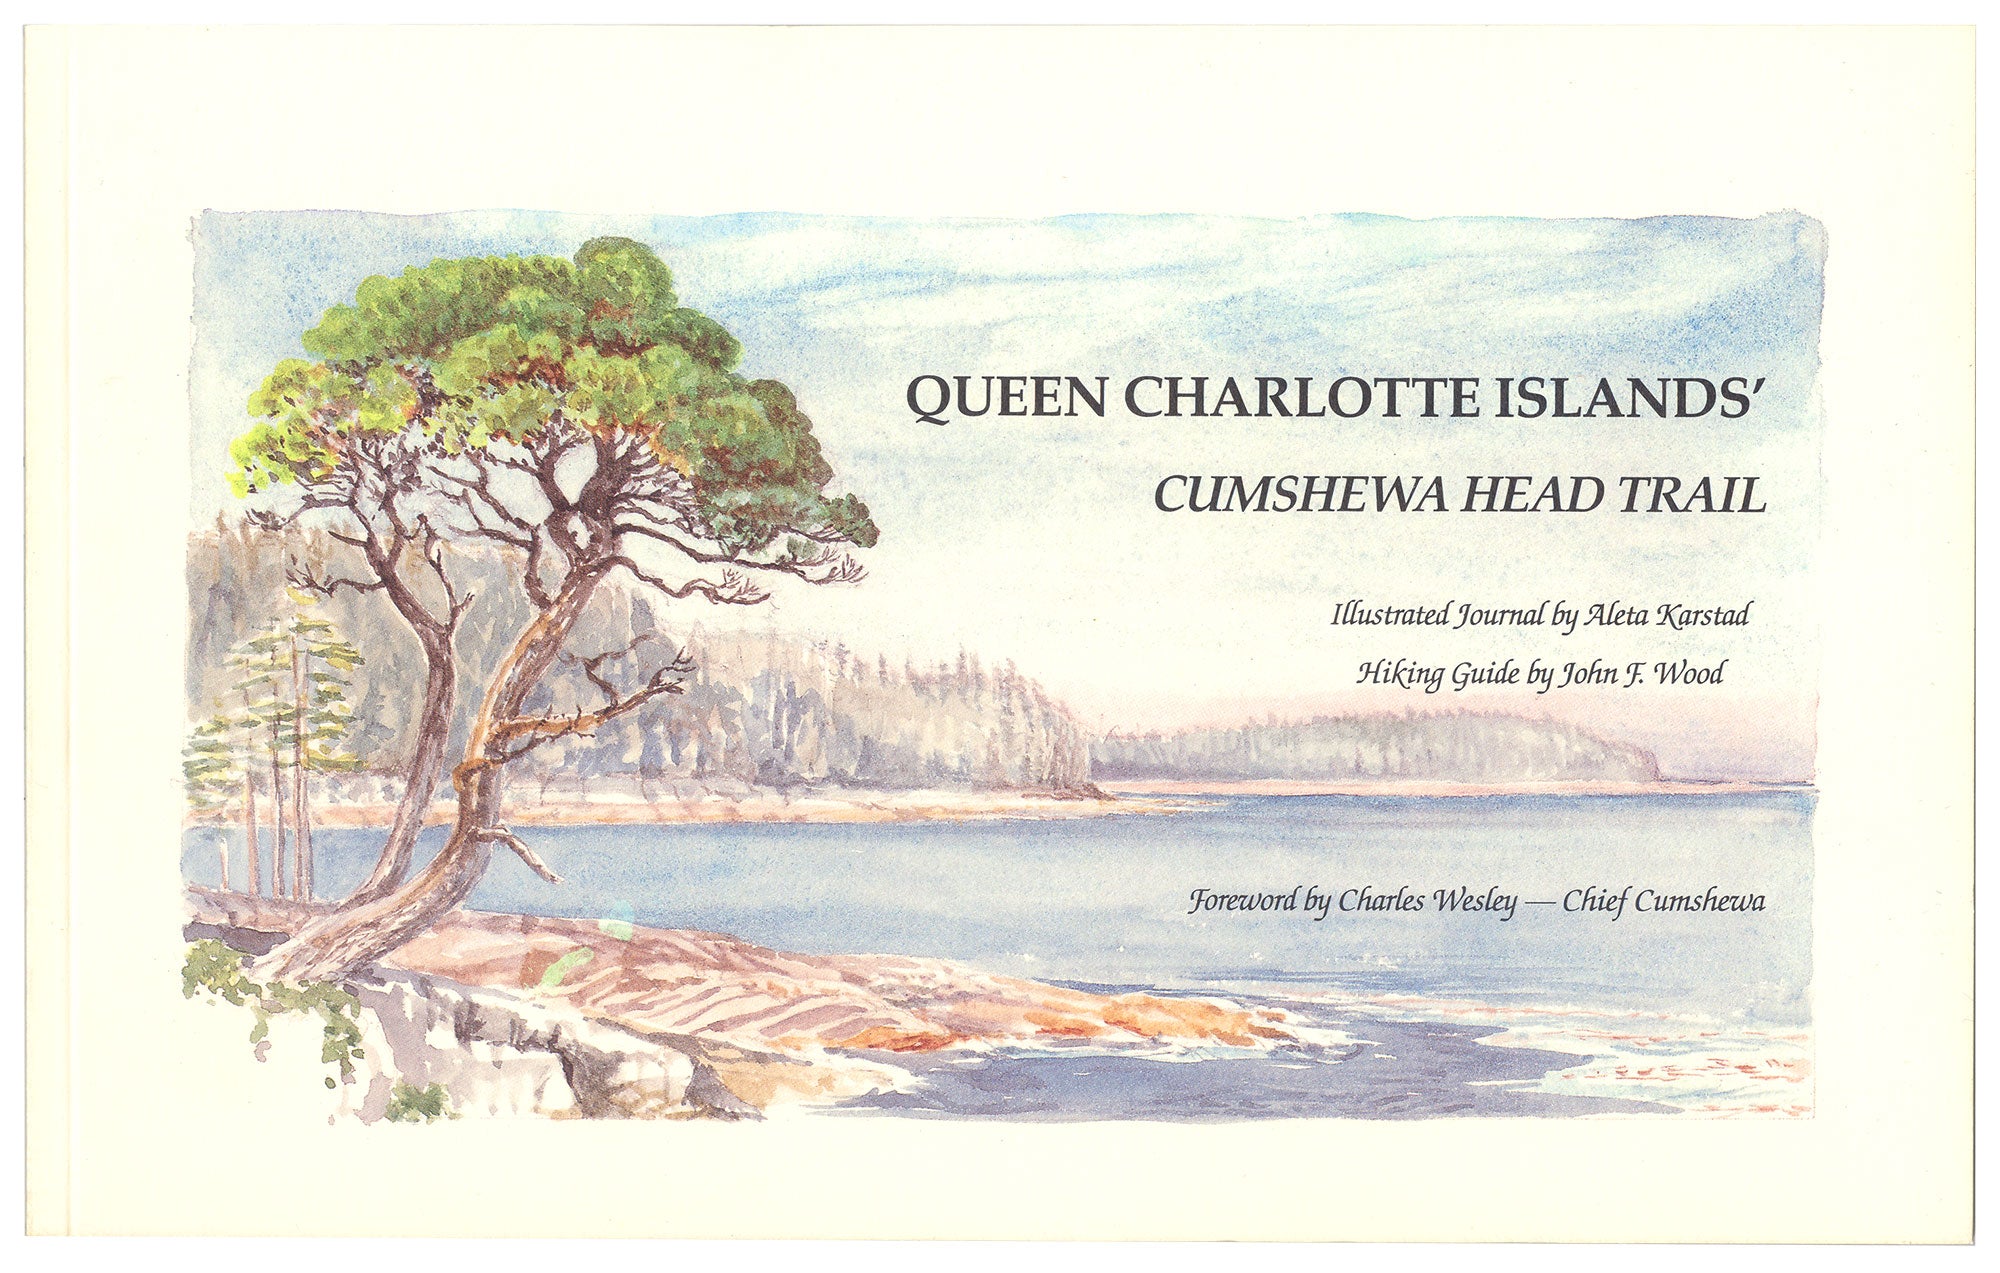 A water painting of a tree near a beach. Text over the image says "Queen Charlotte Islands' Cumshewa Head Trail. Illustrated Journal by Aleta Karstad. Hiking Guide by John F. Wood. Foreward by Charles Wesley - Chief Cumshewa." End of image description.